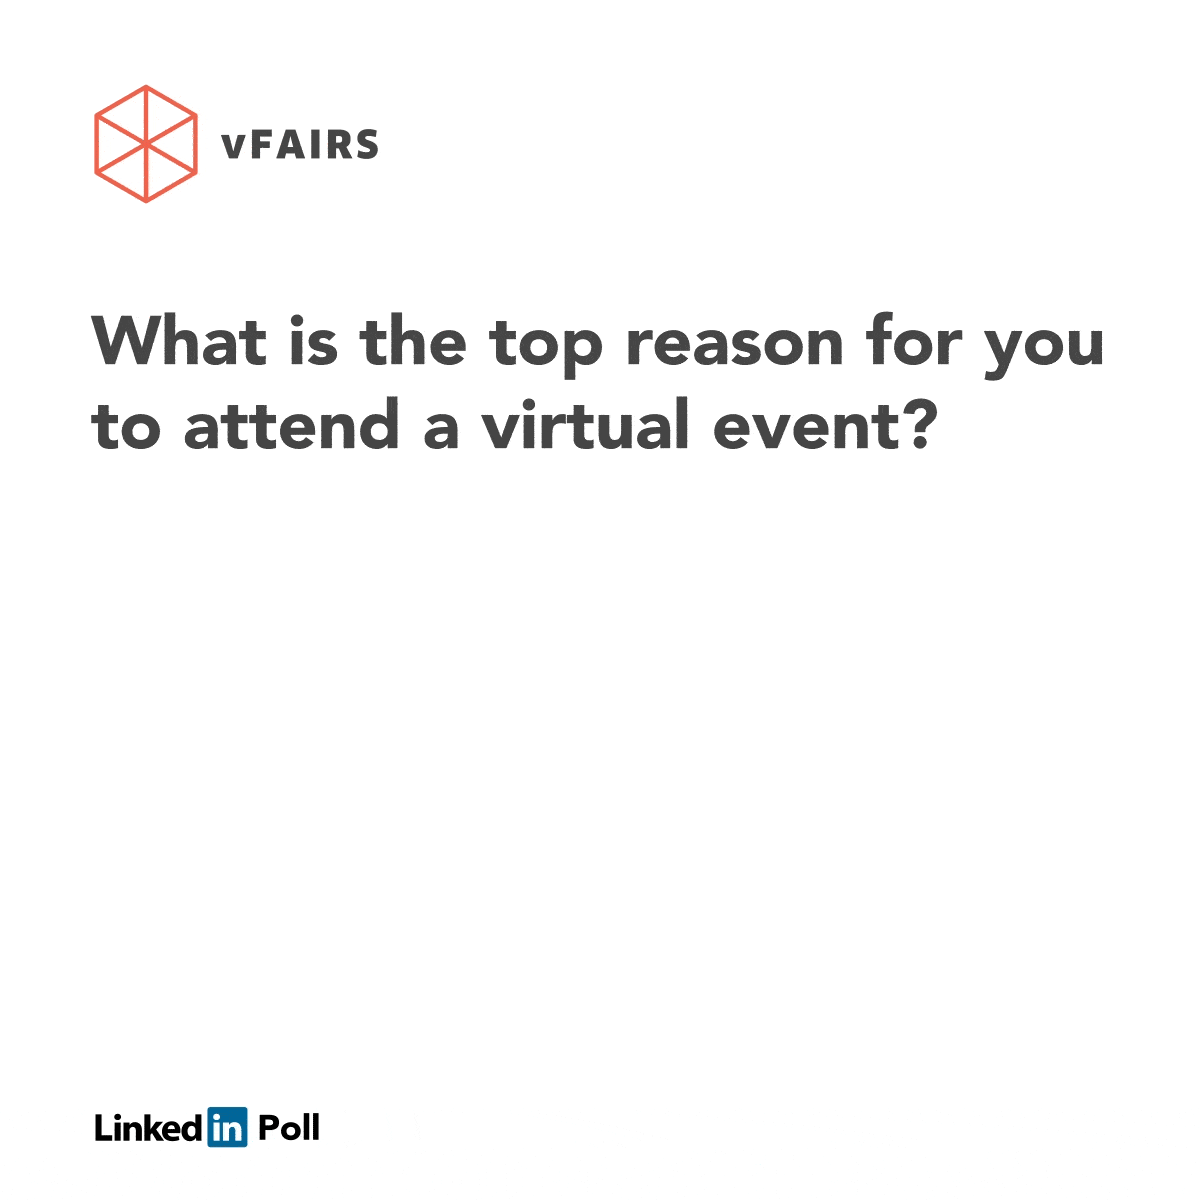 Survey by vFairs on - What is the top reason for you to attend a virtual event. 62% chose :education/information purposes"